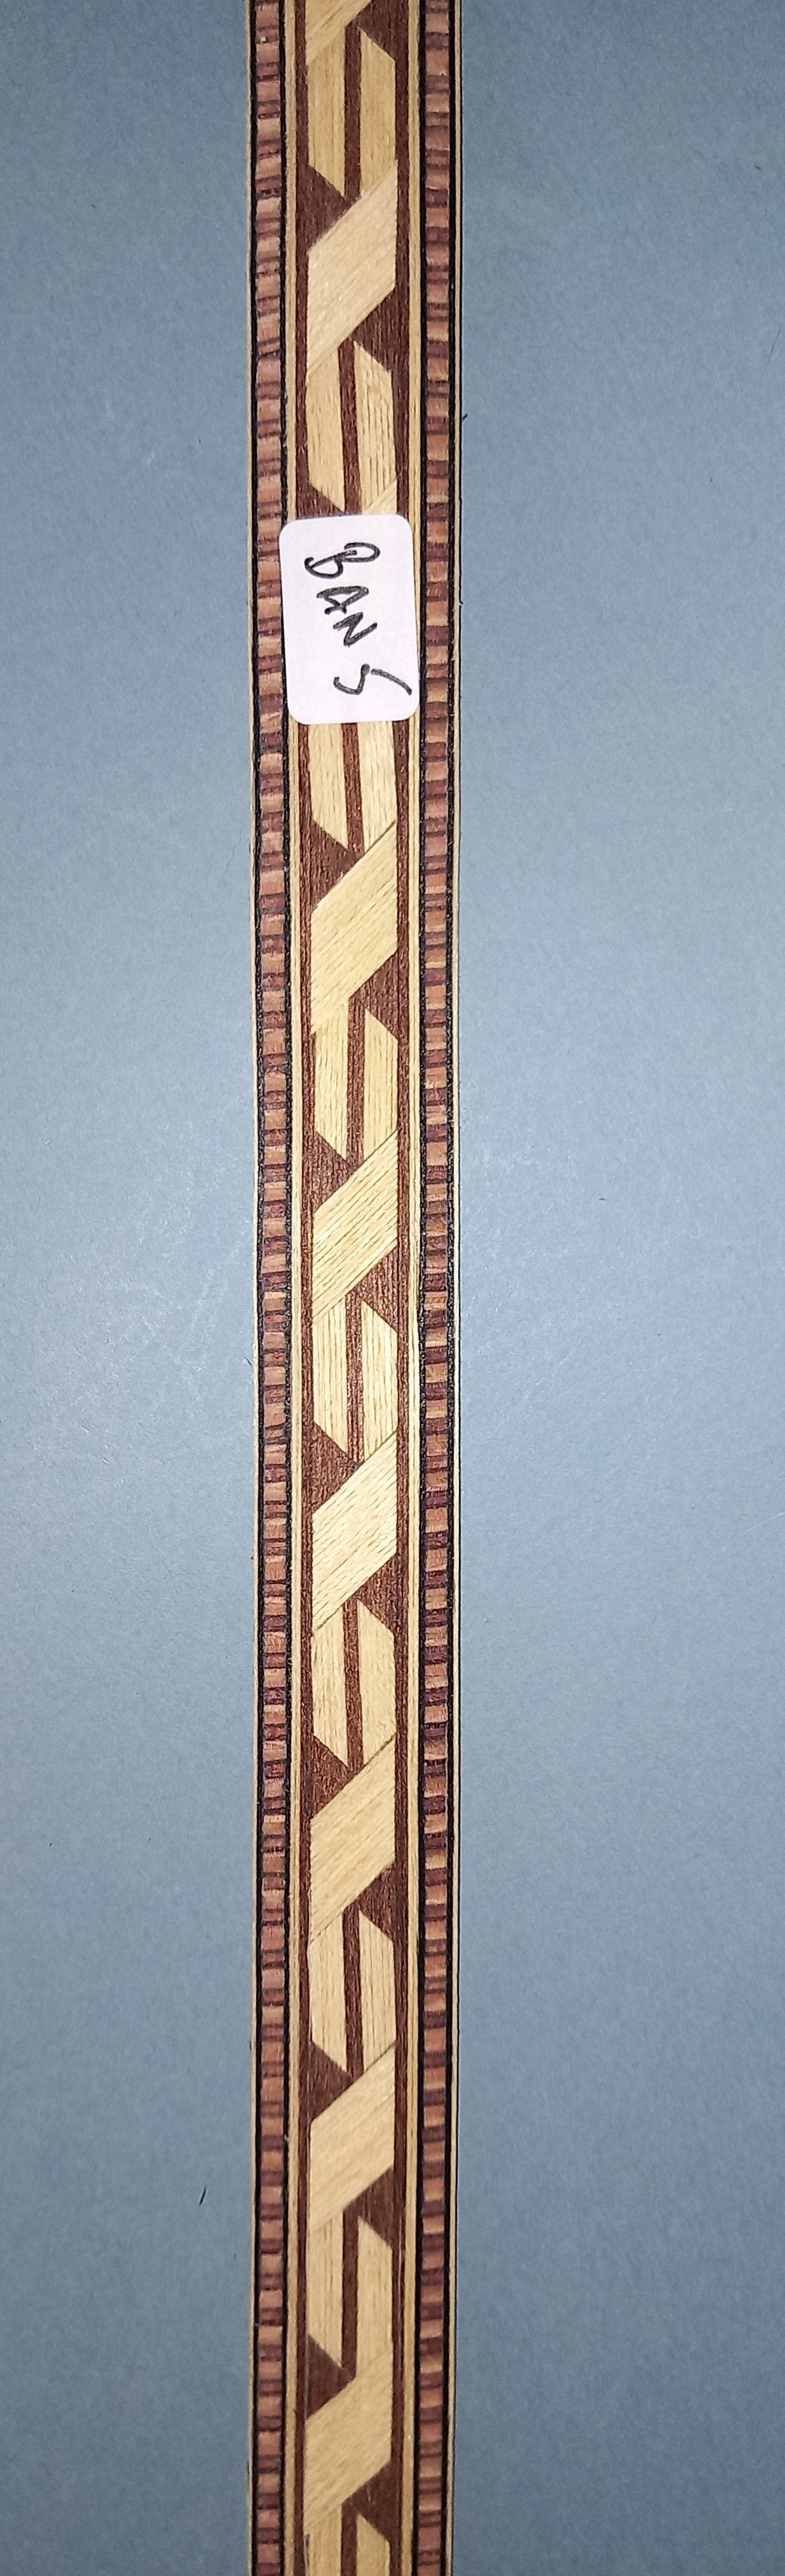 MARQUETRY INLAY BANDINGS 0.5MM THICK      20 X 100 CM